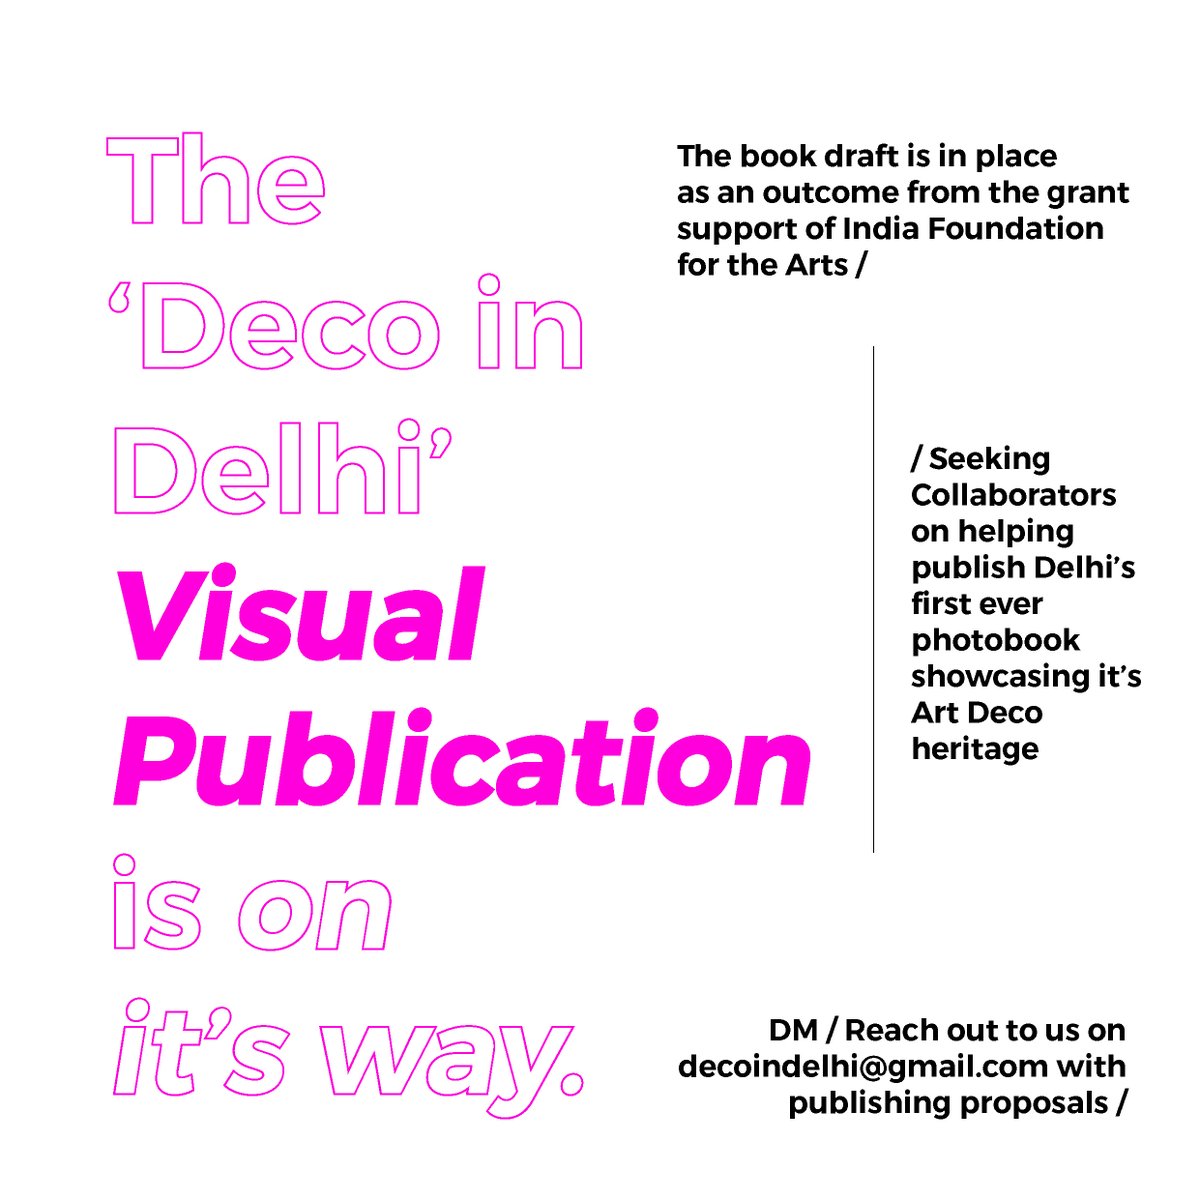 Seeking support and ideas to realise Delhi's first ever #photobook showcasing it's valuable #artdeco #heritage, write to us if you can help bringing this important project milestone to reality. The book draft has been completed as part of the #artsresearch #grant from @IndiaIFA